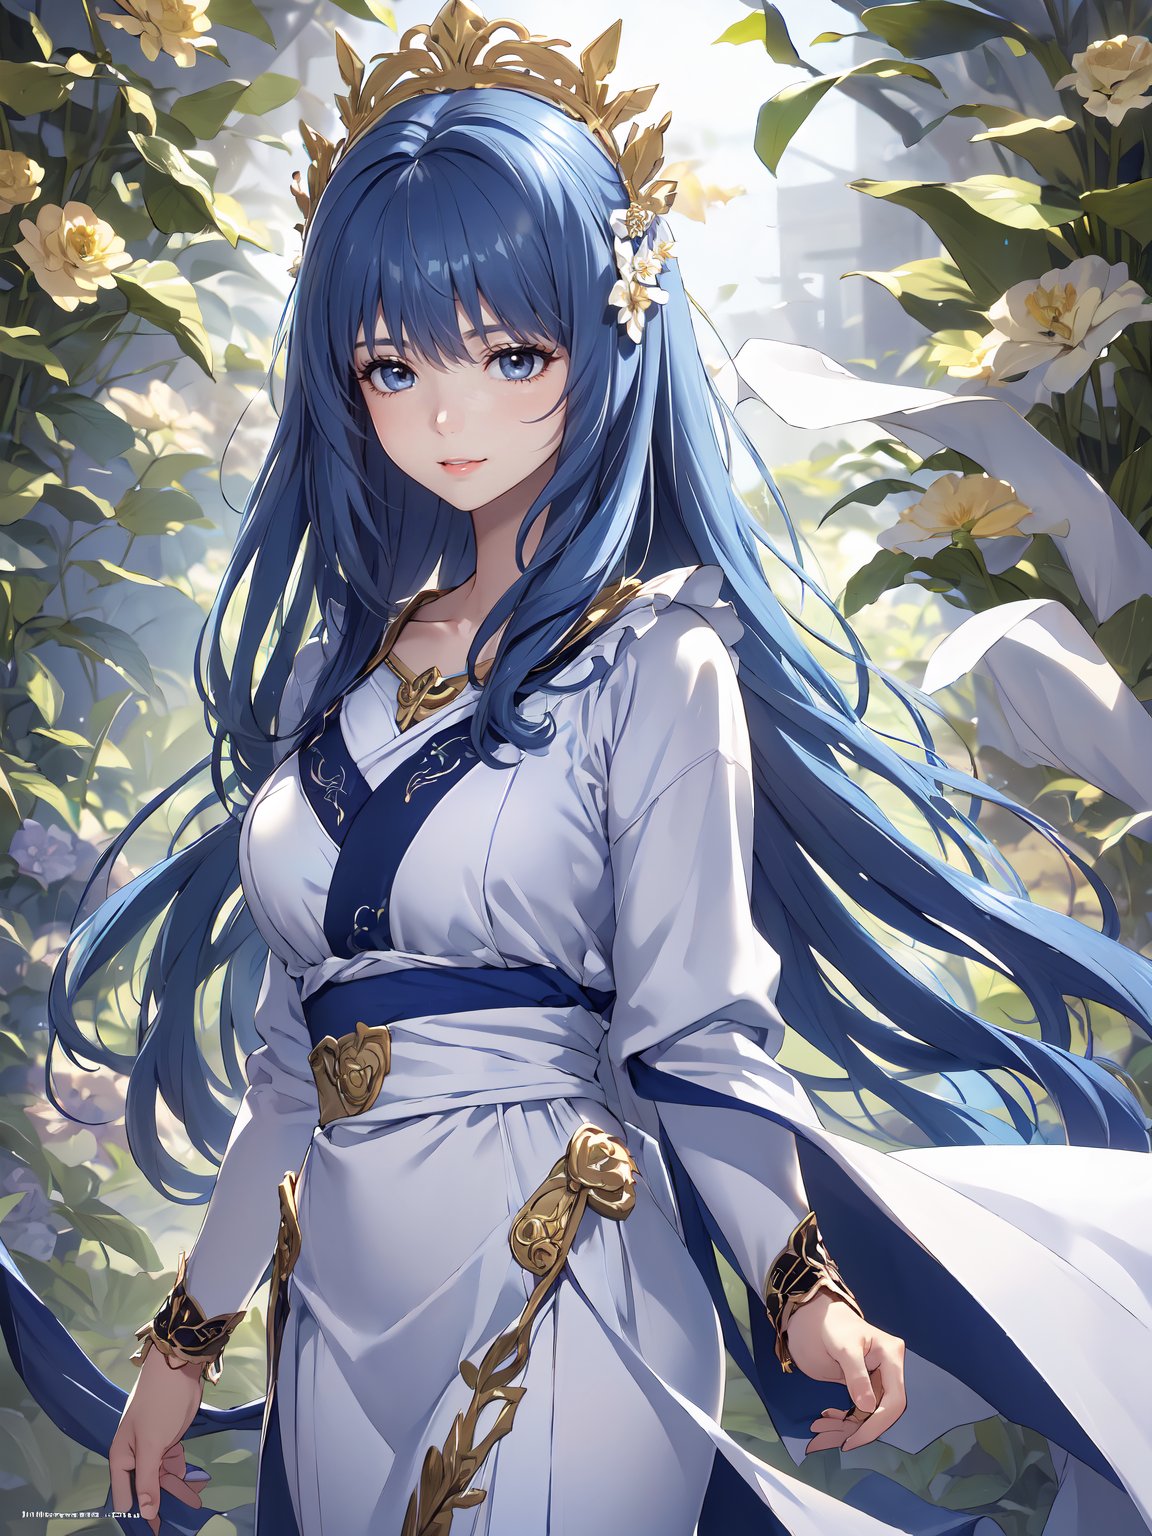 8k, masterpiece, ultra-realistic, best quality, high resolution, high resolution, 1girl, solo, reah, blue hair, blue eyes, thin eyebrow, busty and sexy girl, standing gracefully, serene expression, flower garden background.
FLOWER headdress adorned with gold accents and pearls, FLOWER PATTERN KIMONO, gold embroidery and gemstones, flowing robe or gown,
COLORFUL SMOKE BACKGROUND, rich golds and glowing whites,
luxurious, elegant, detailed